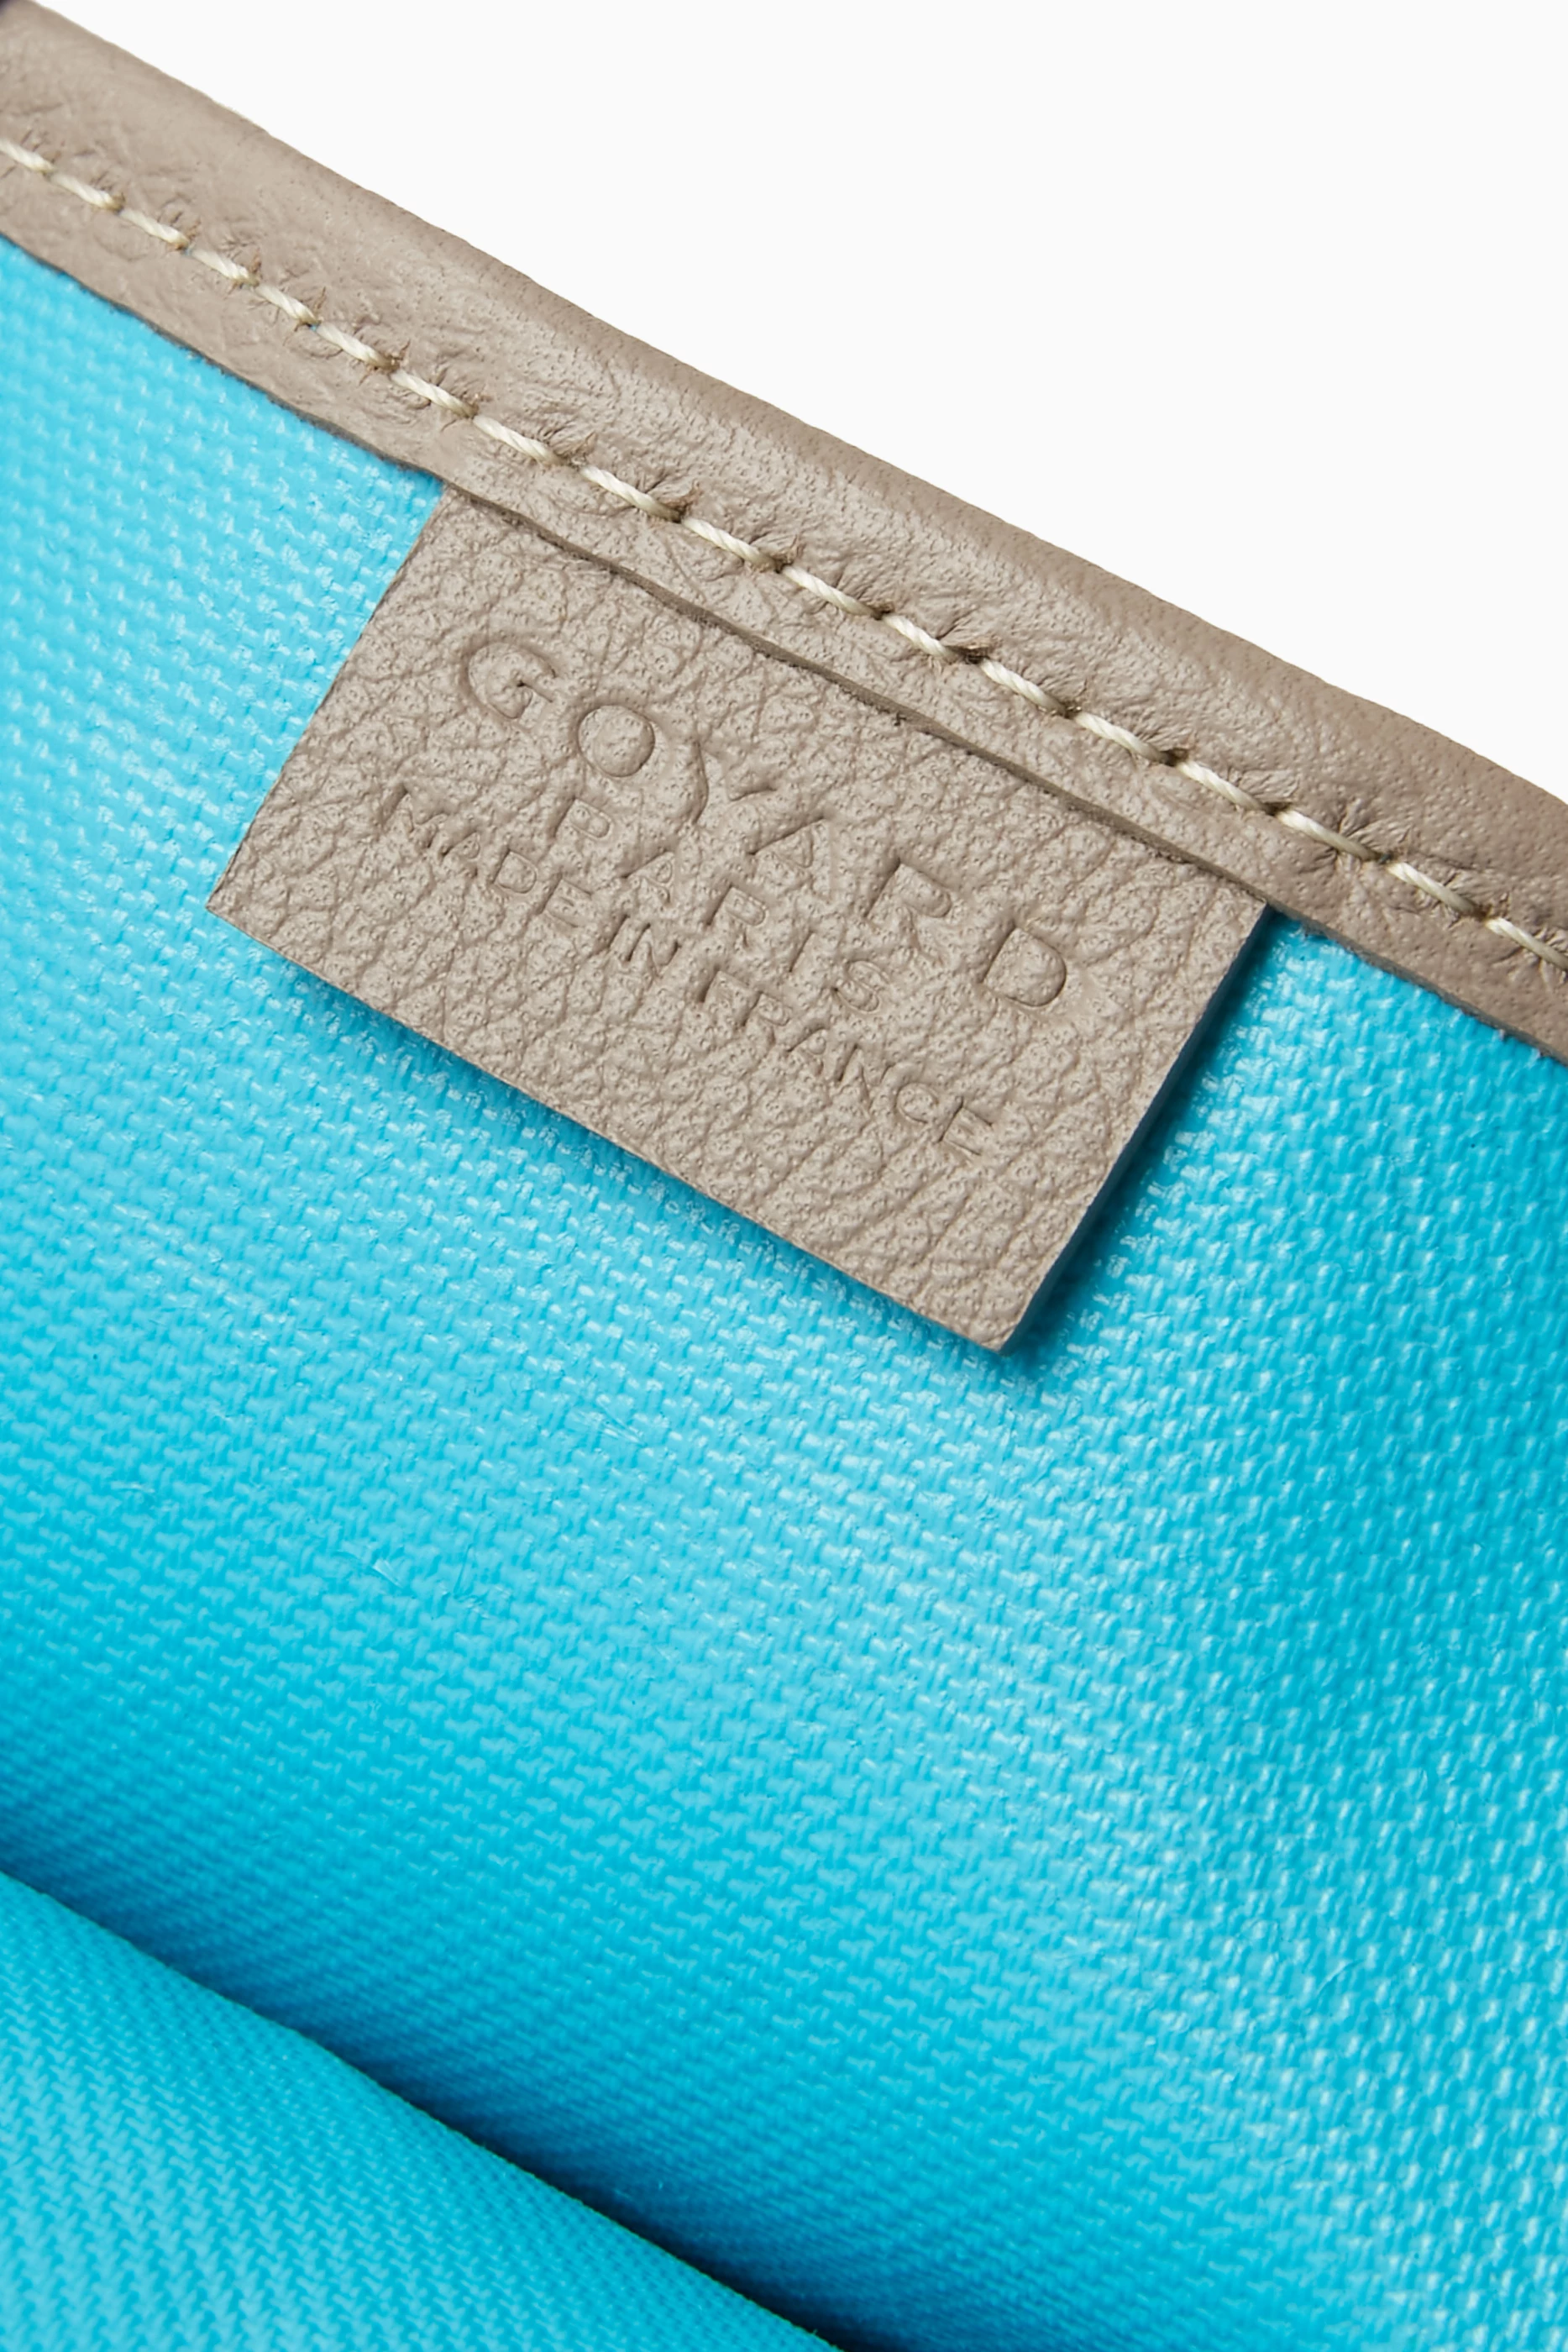 Goyard Greige And Turquoise Limited Edition Goyardine Canvas And